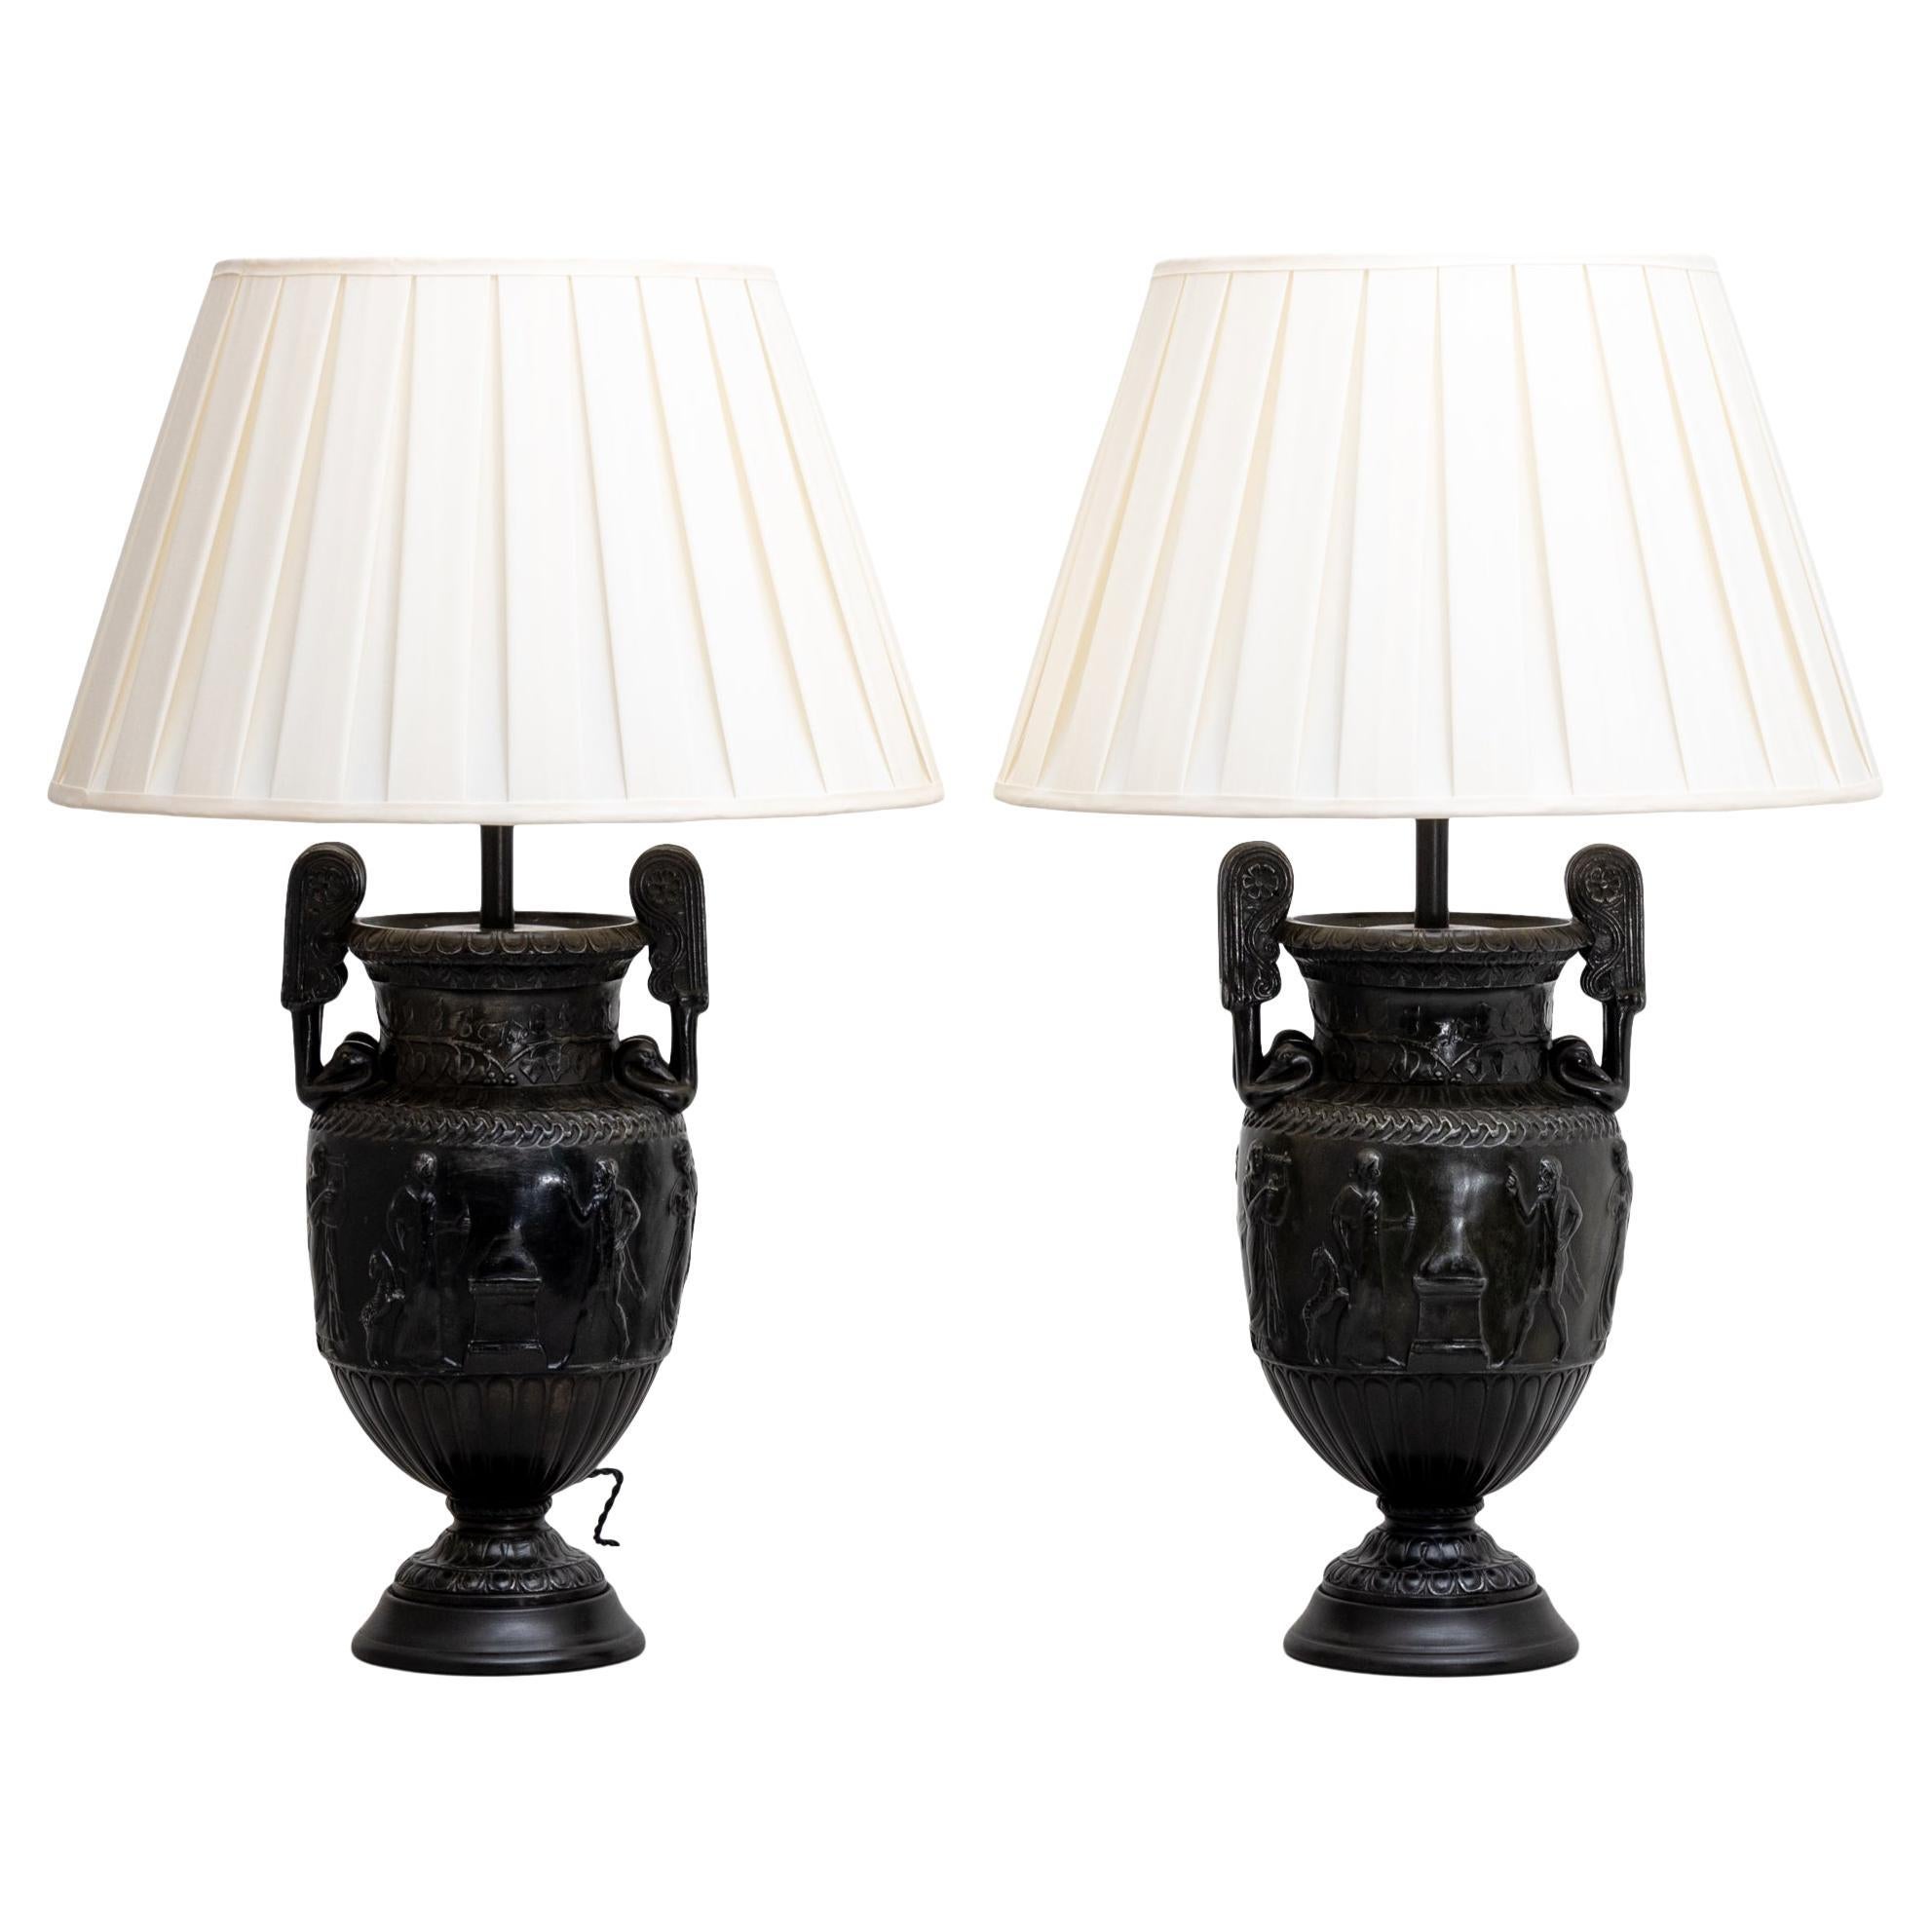 Table Lamps with Townley Vases, France 19th Century